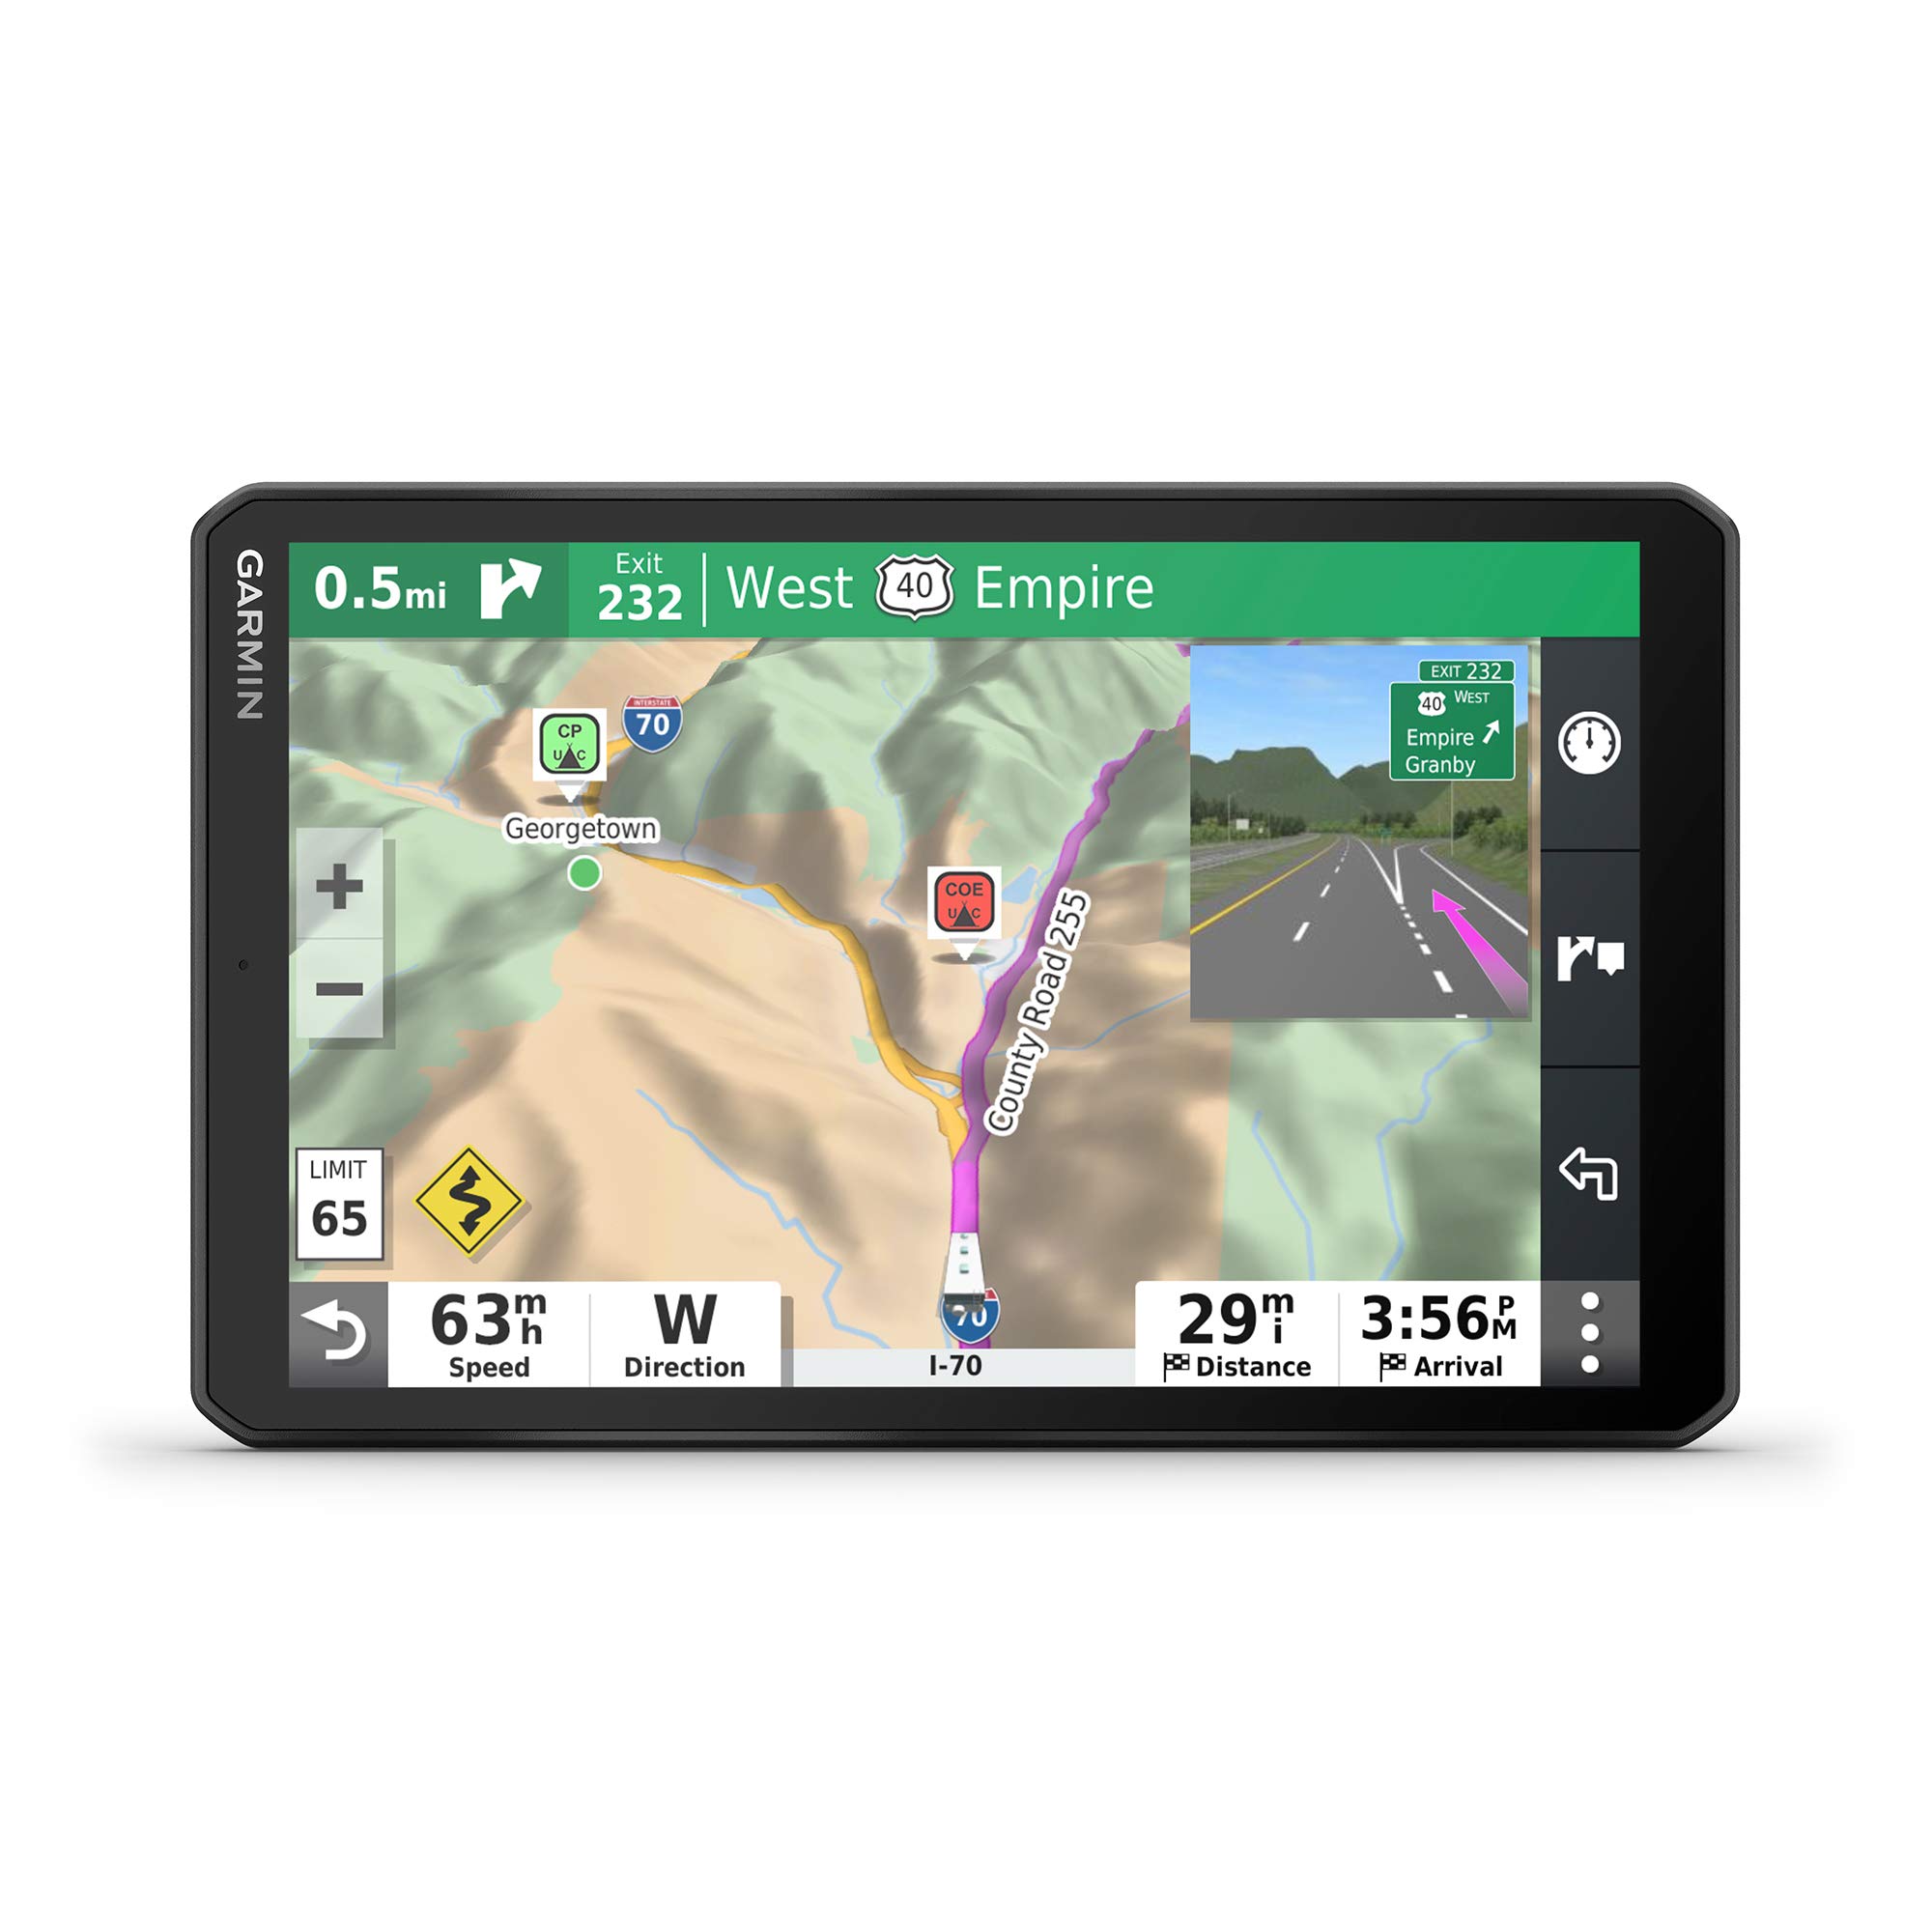 Garmin RV 890, GPS Navigator for RVs with Edge-to-Edge 8” Display, Preloaded Campgrounds, Custom Routing and More